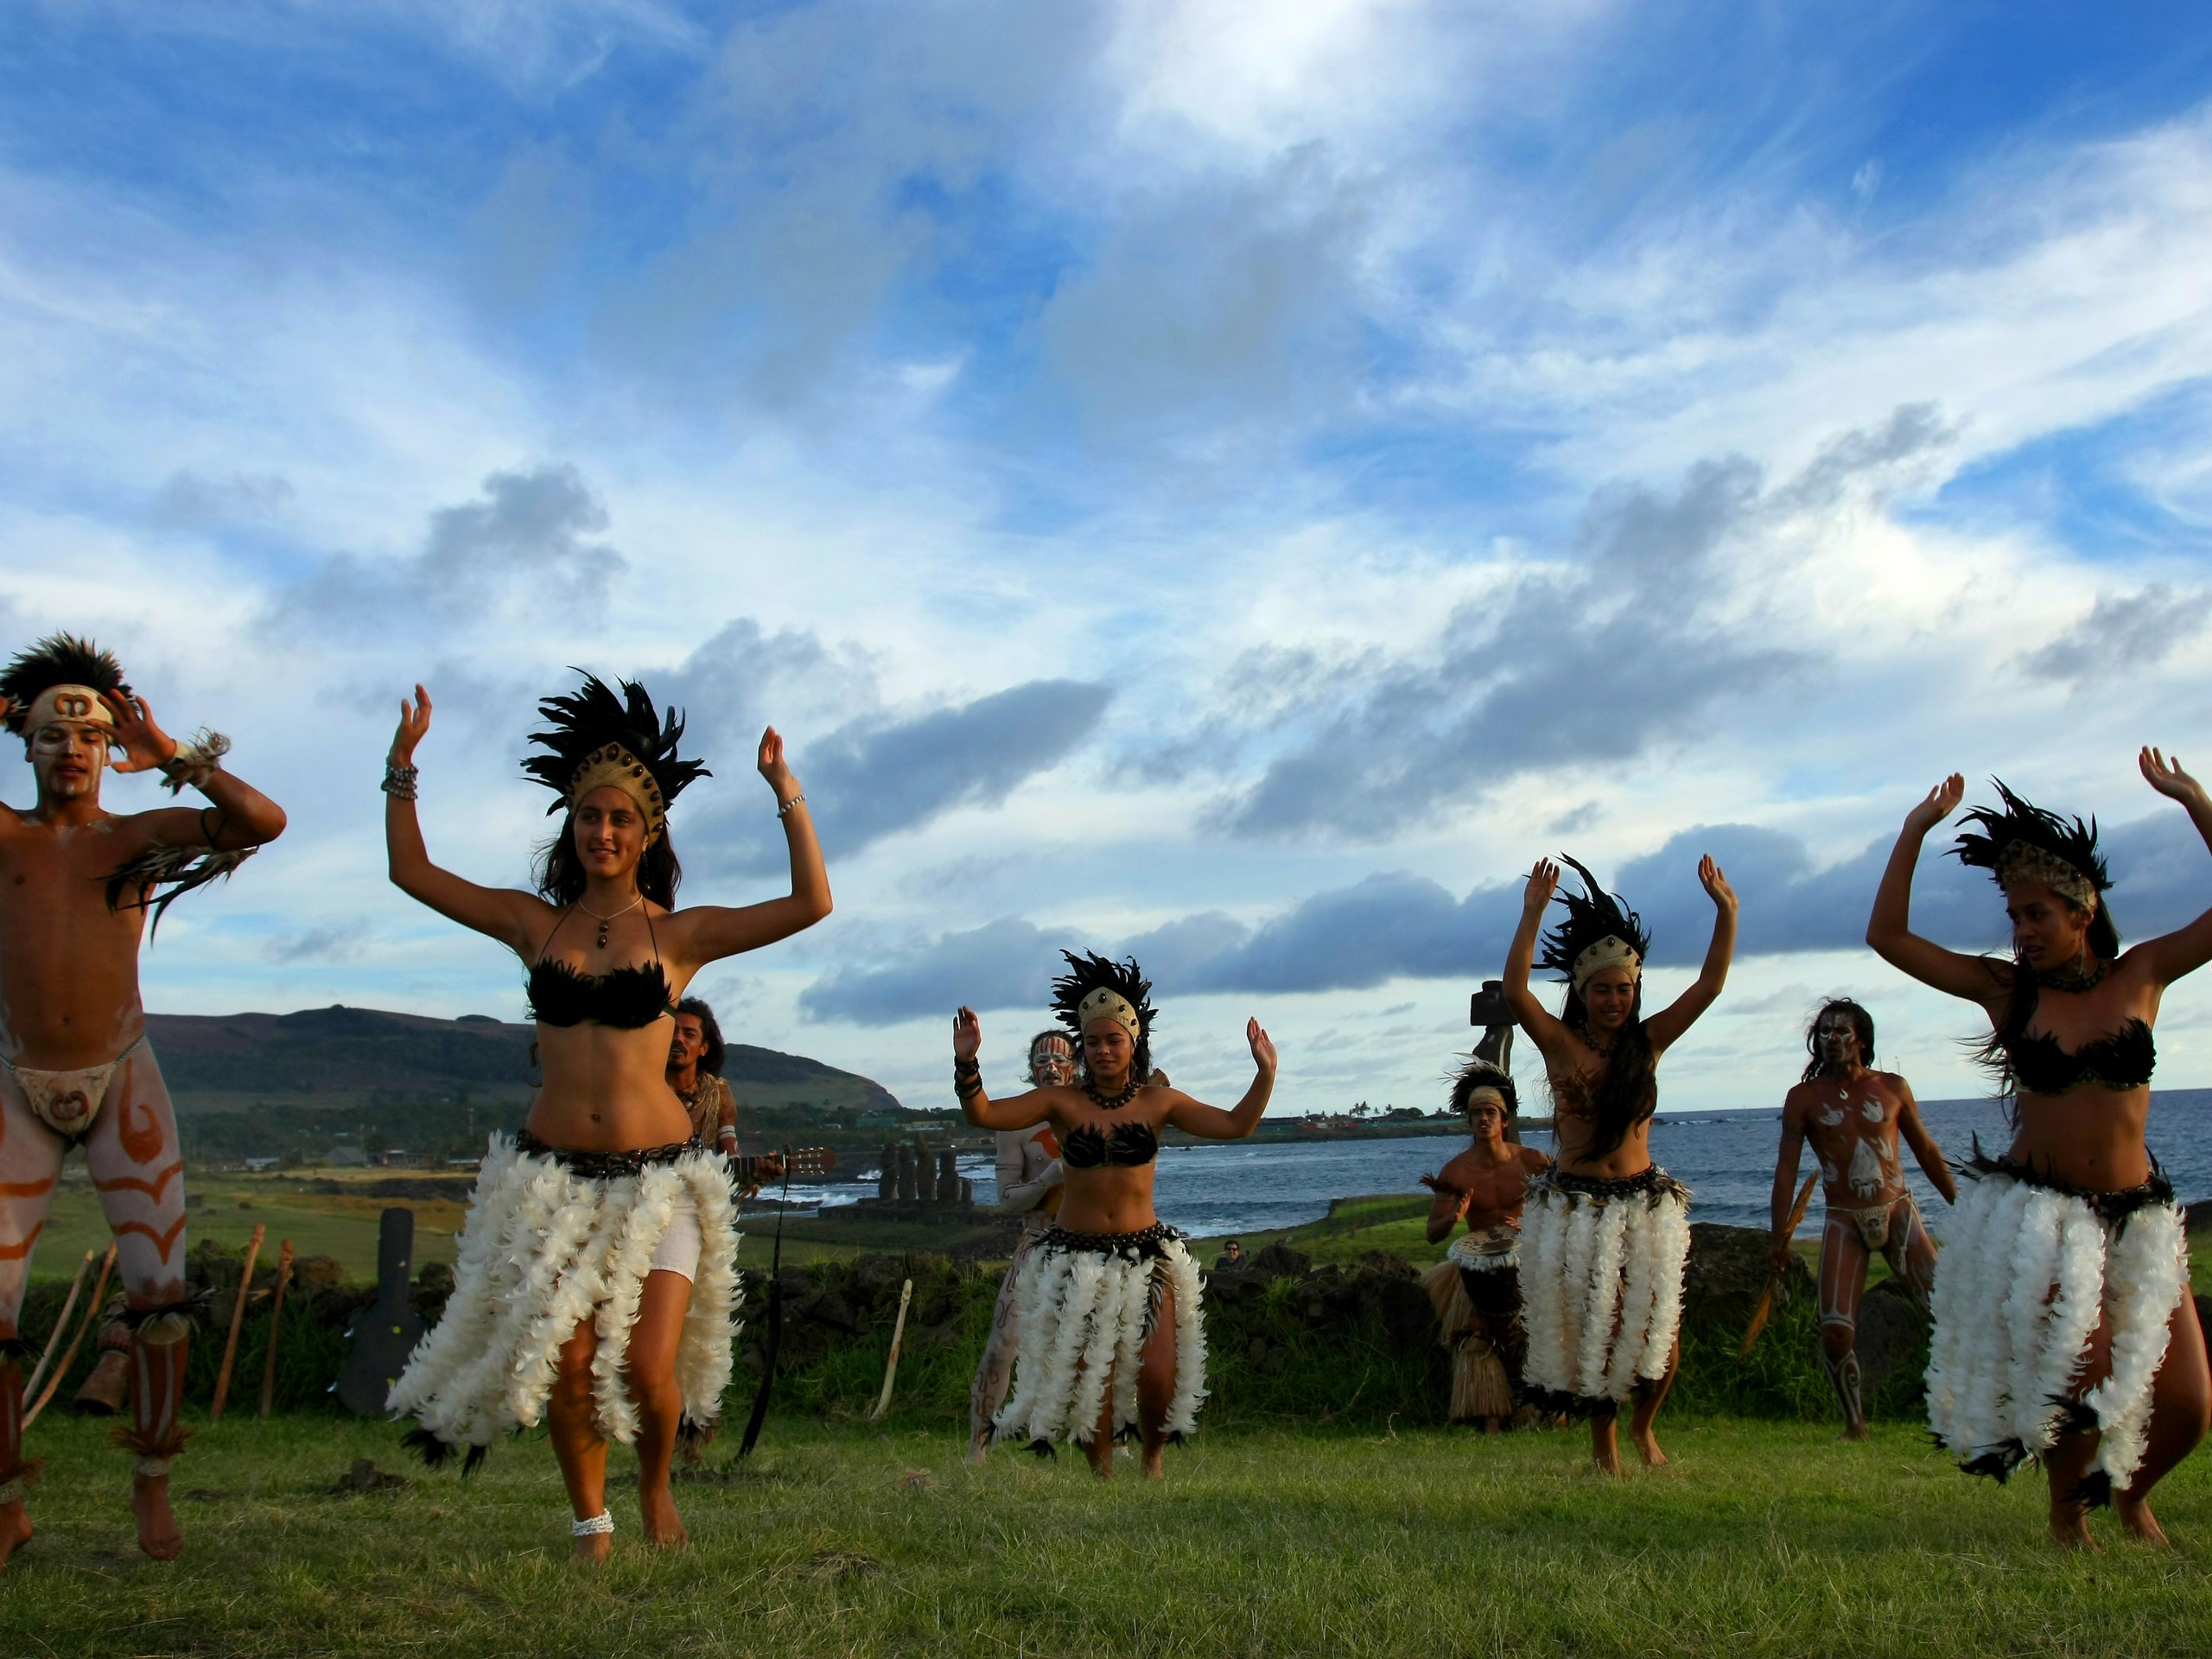 Locals dancing during the cultural experience evening in Easter Island